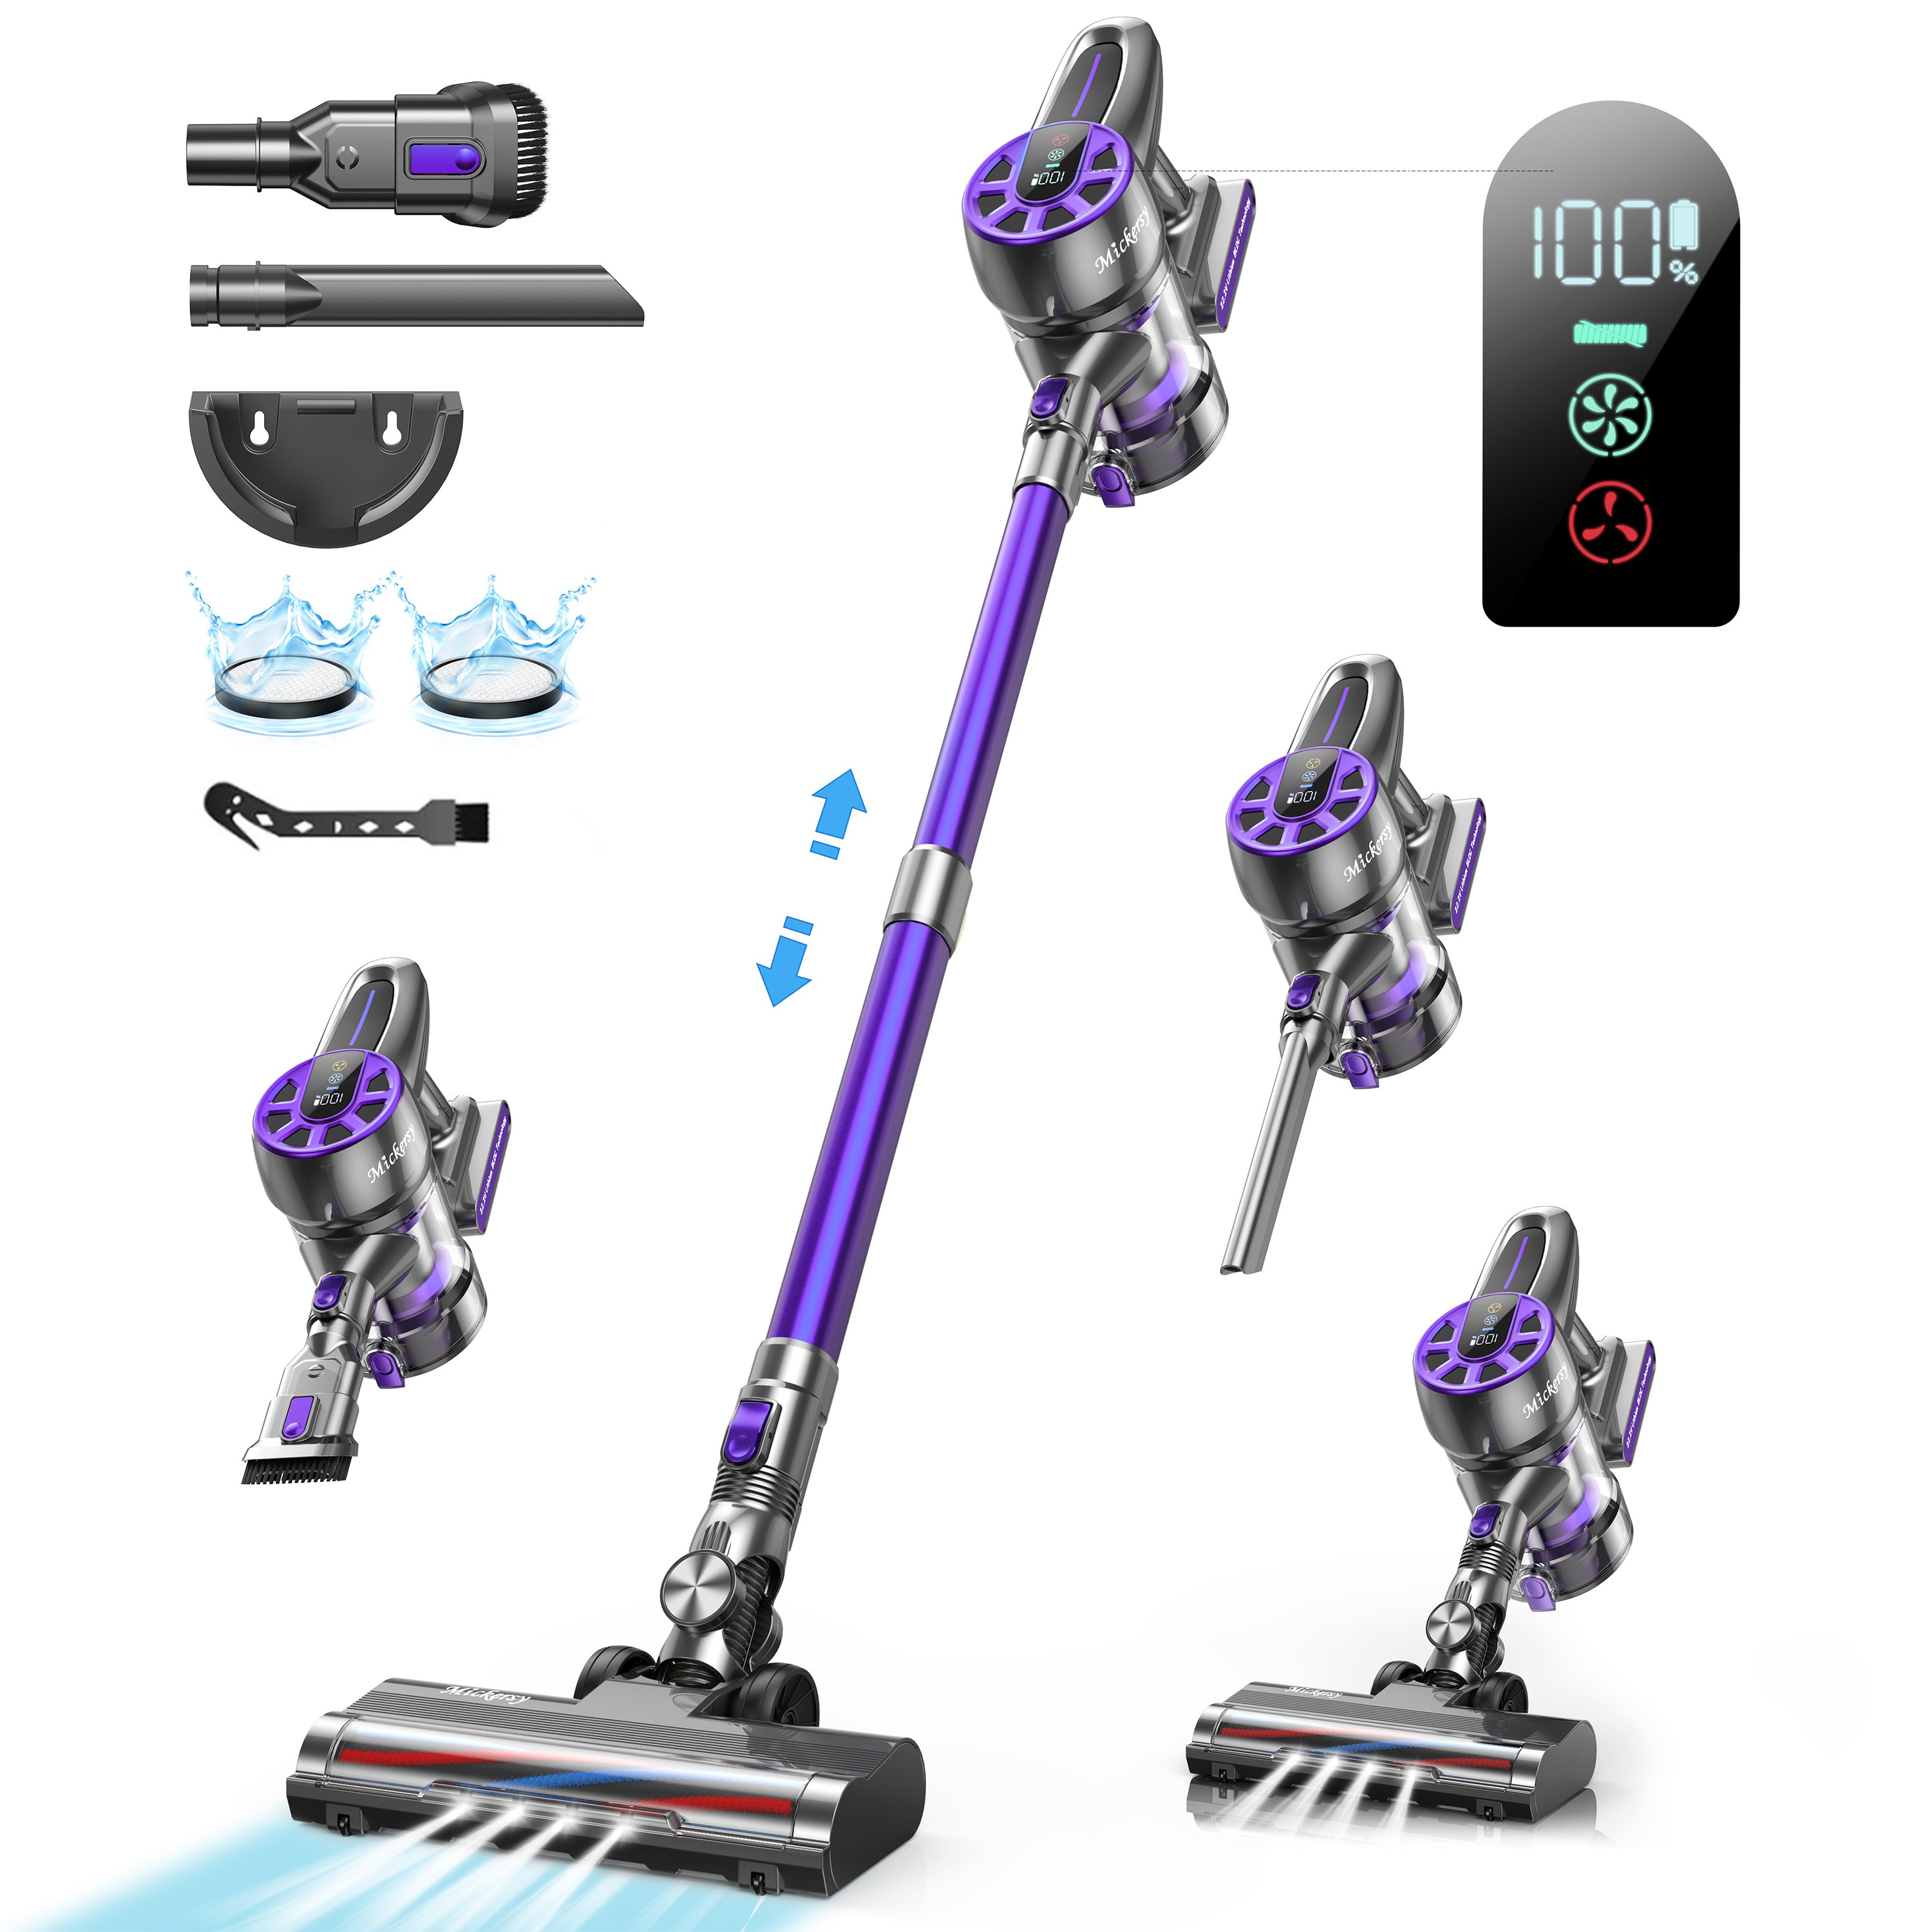 

Cordless Vacuum Cleaner, Power Stick Vacuum 450w 36kpa With Long Runtime Detachable Battery, Vacuum Cleaner With Led Display Lightweight & Quiet, For Pet Hair, Floor, Carpet, 1.5l Dust Cup